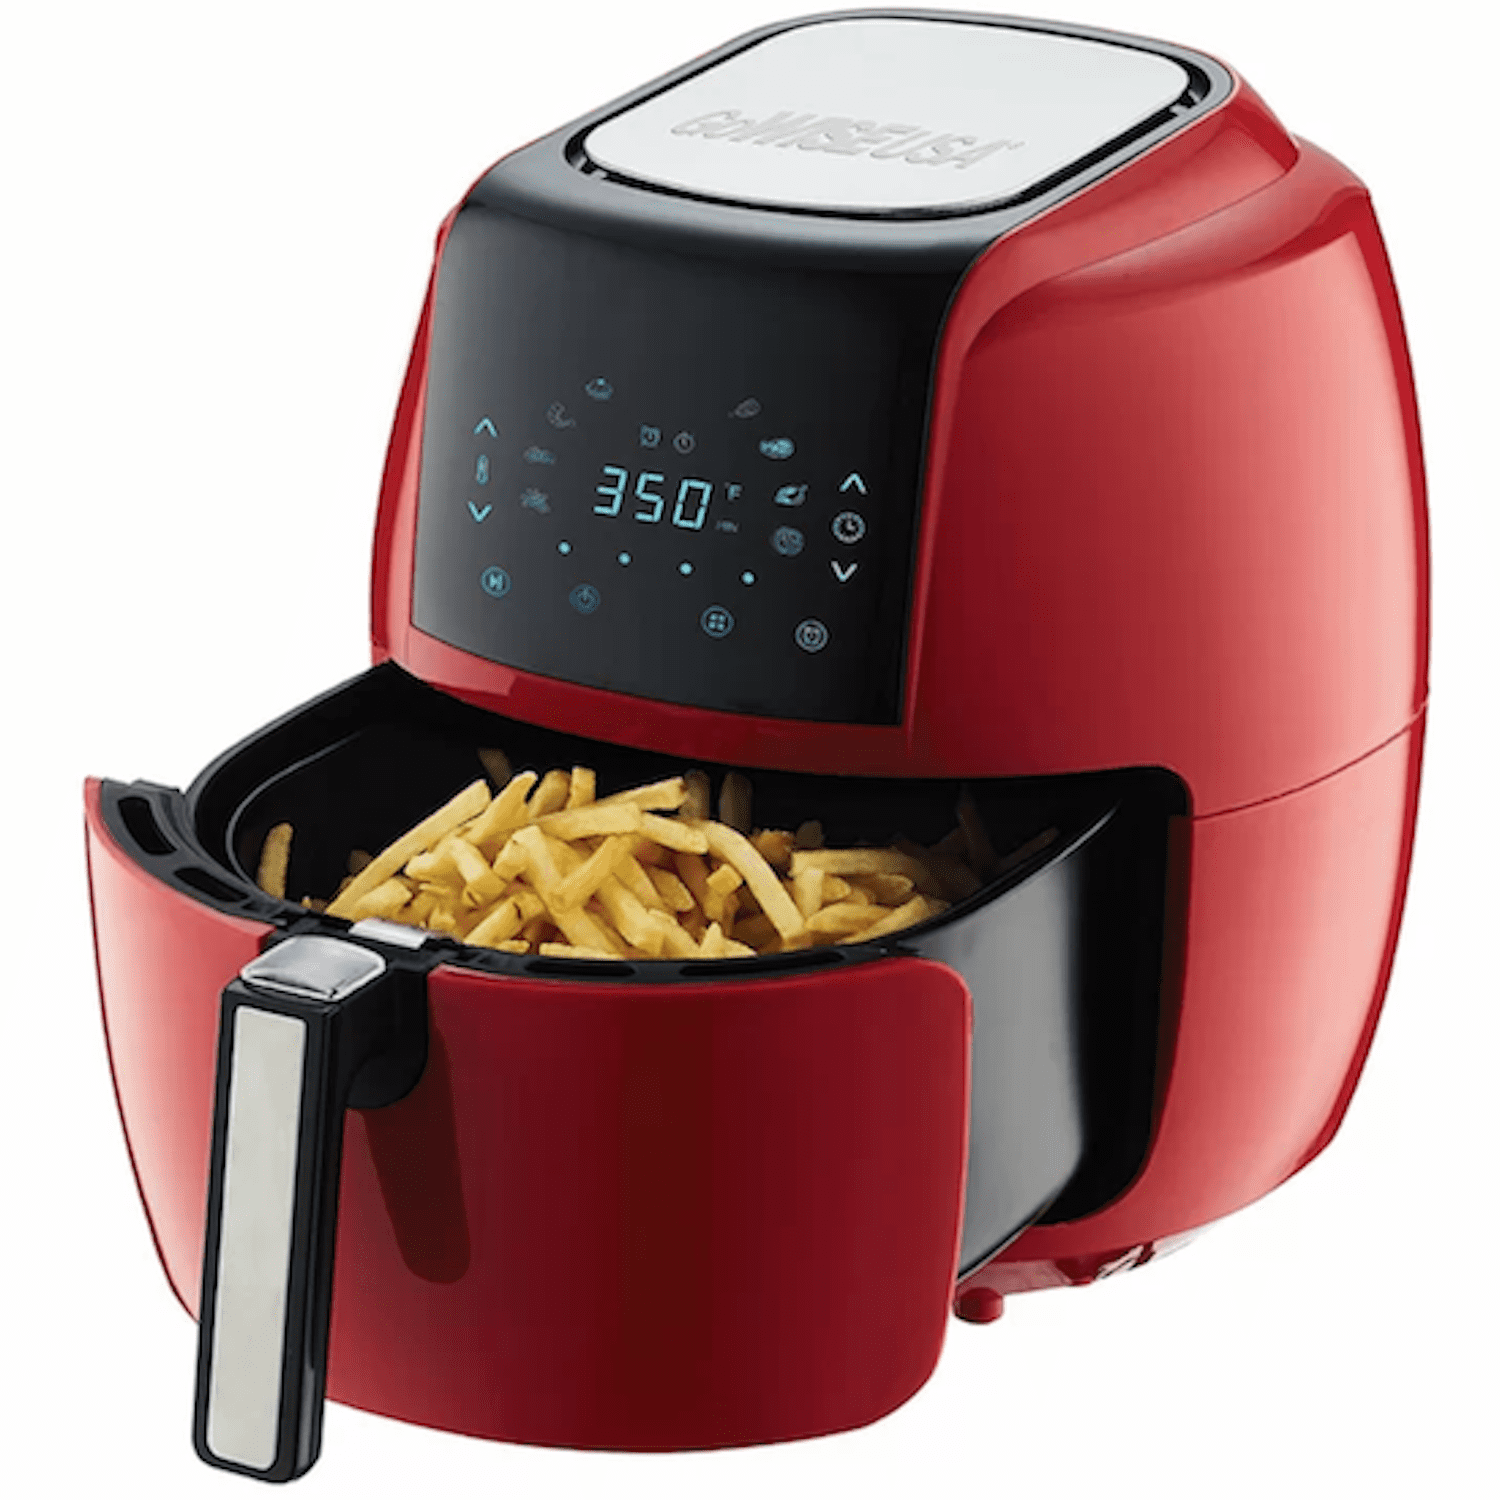 A Chili Red GoWISE USA 5.5 Liter 8-in-1 Electric Air Fryer carrying a bucket of French Fries